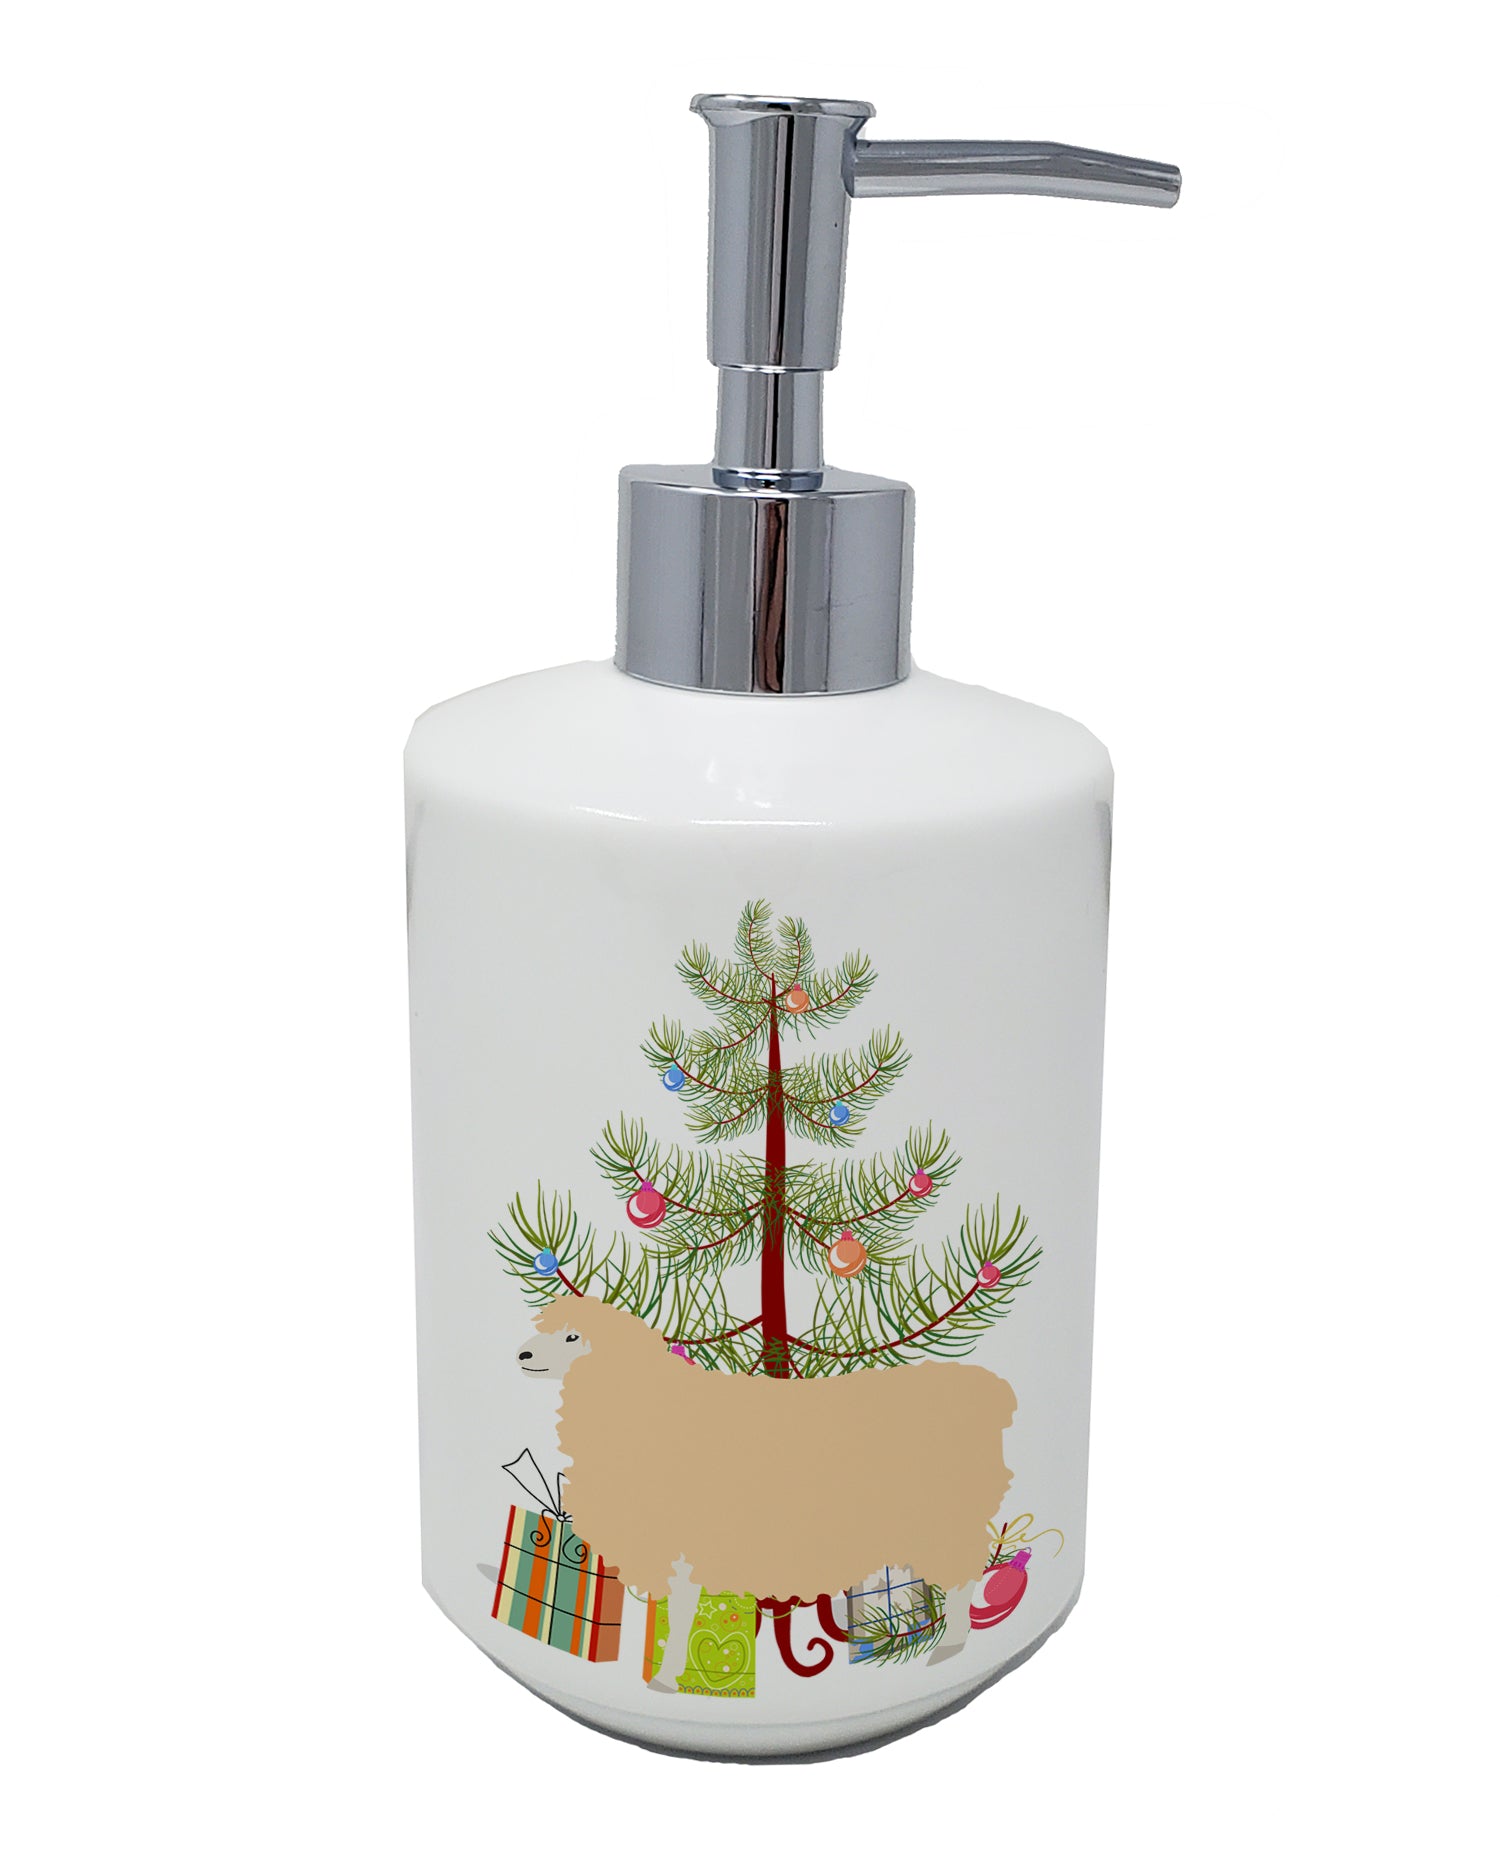 Buy this English Leicester Longwool Sheep Christmas Ceramic Soap Dispenser